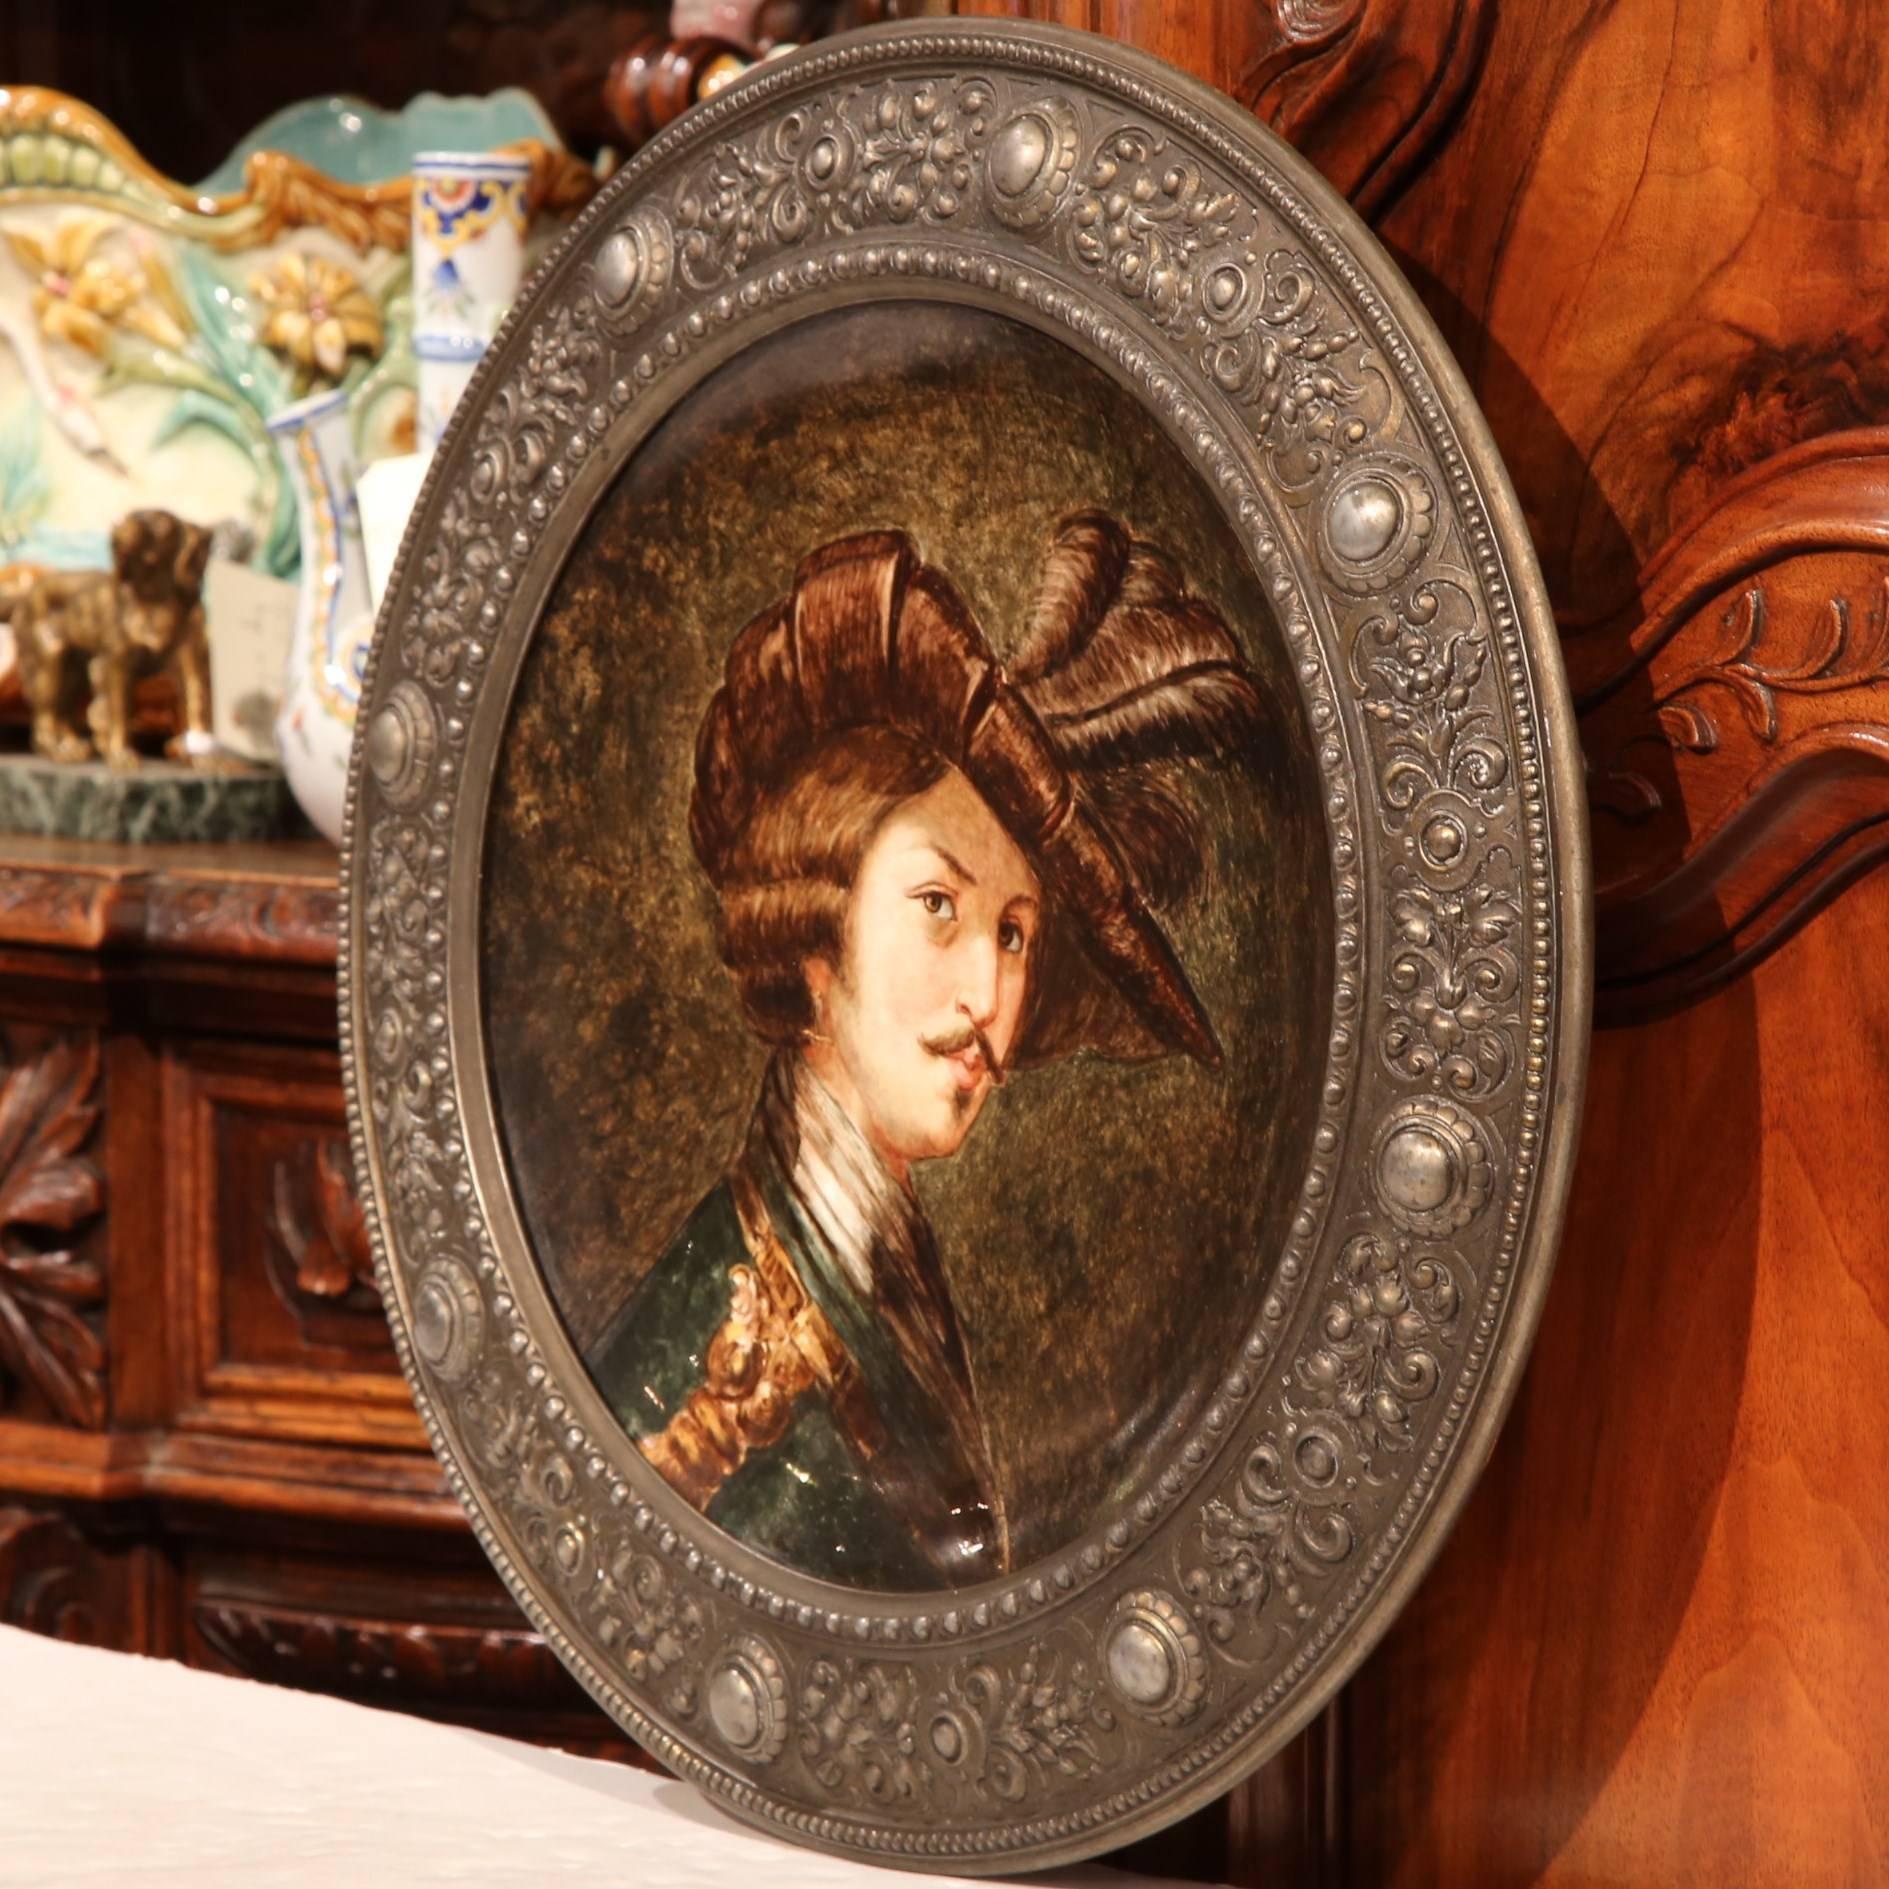 Decorate a man's office with this large, hand painted porcelain plate; crafted in Germany, circa 1880 and round in shape, the painted ceramic platter depicts the portrait of a man dressed in ornate period clothing. The antique wall plate is set in a